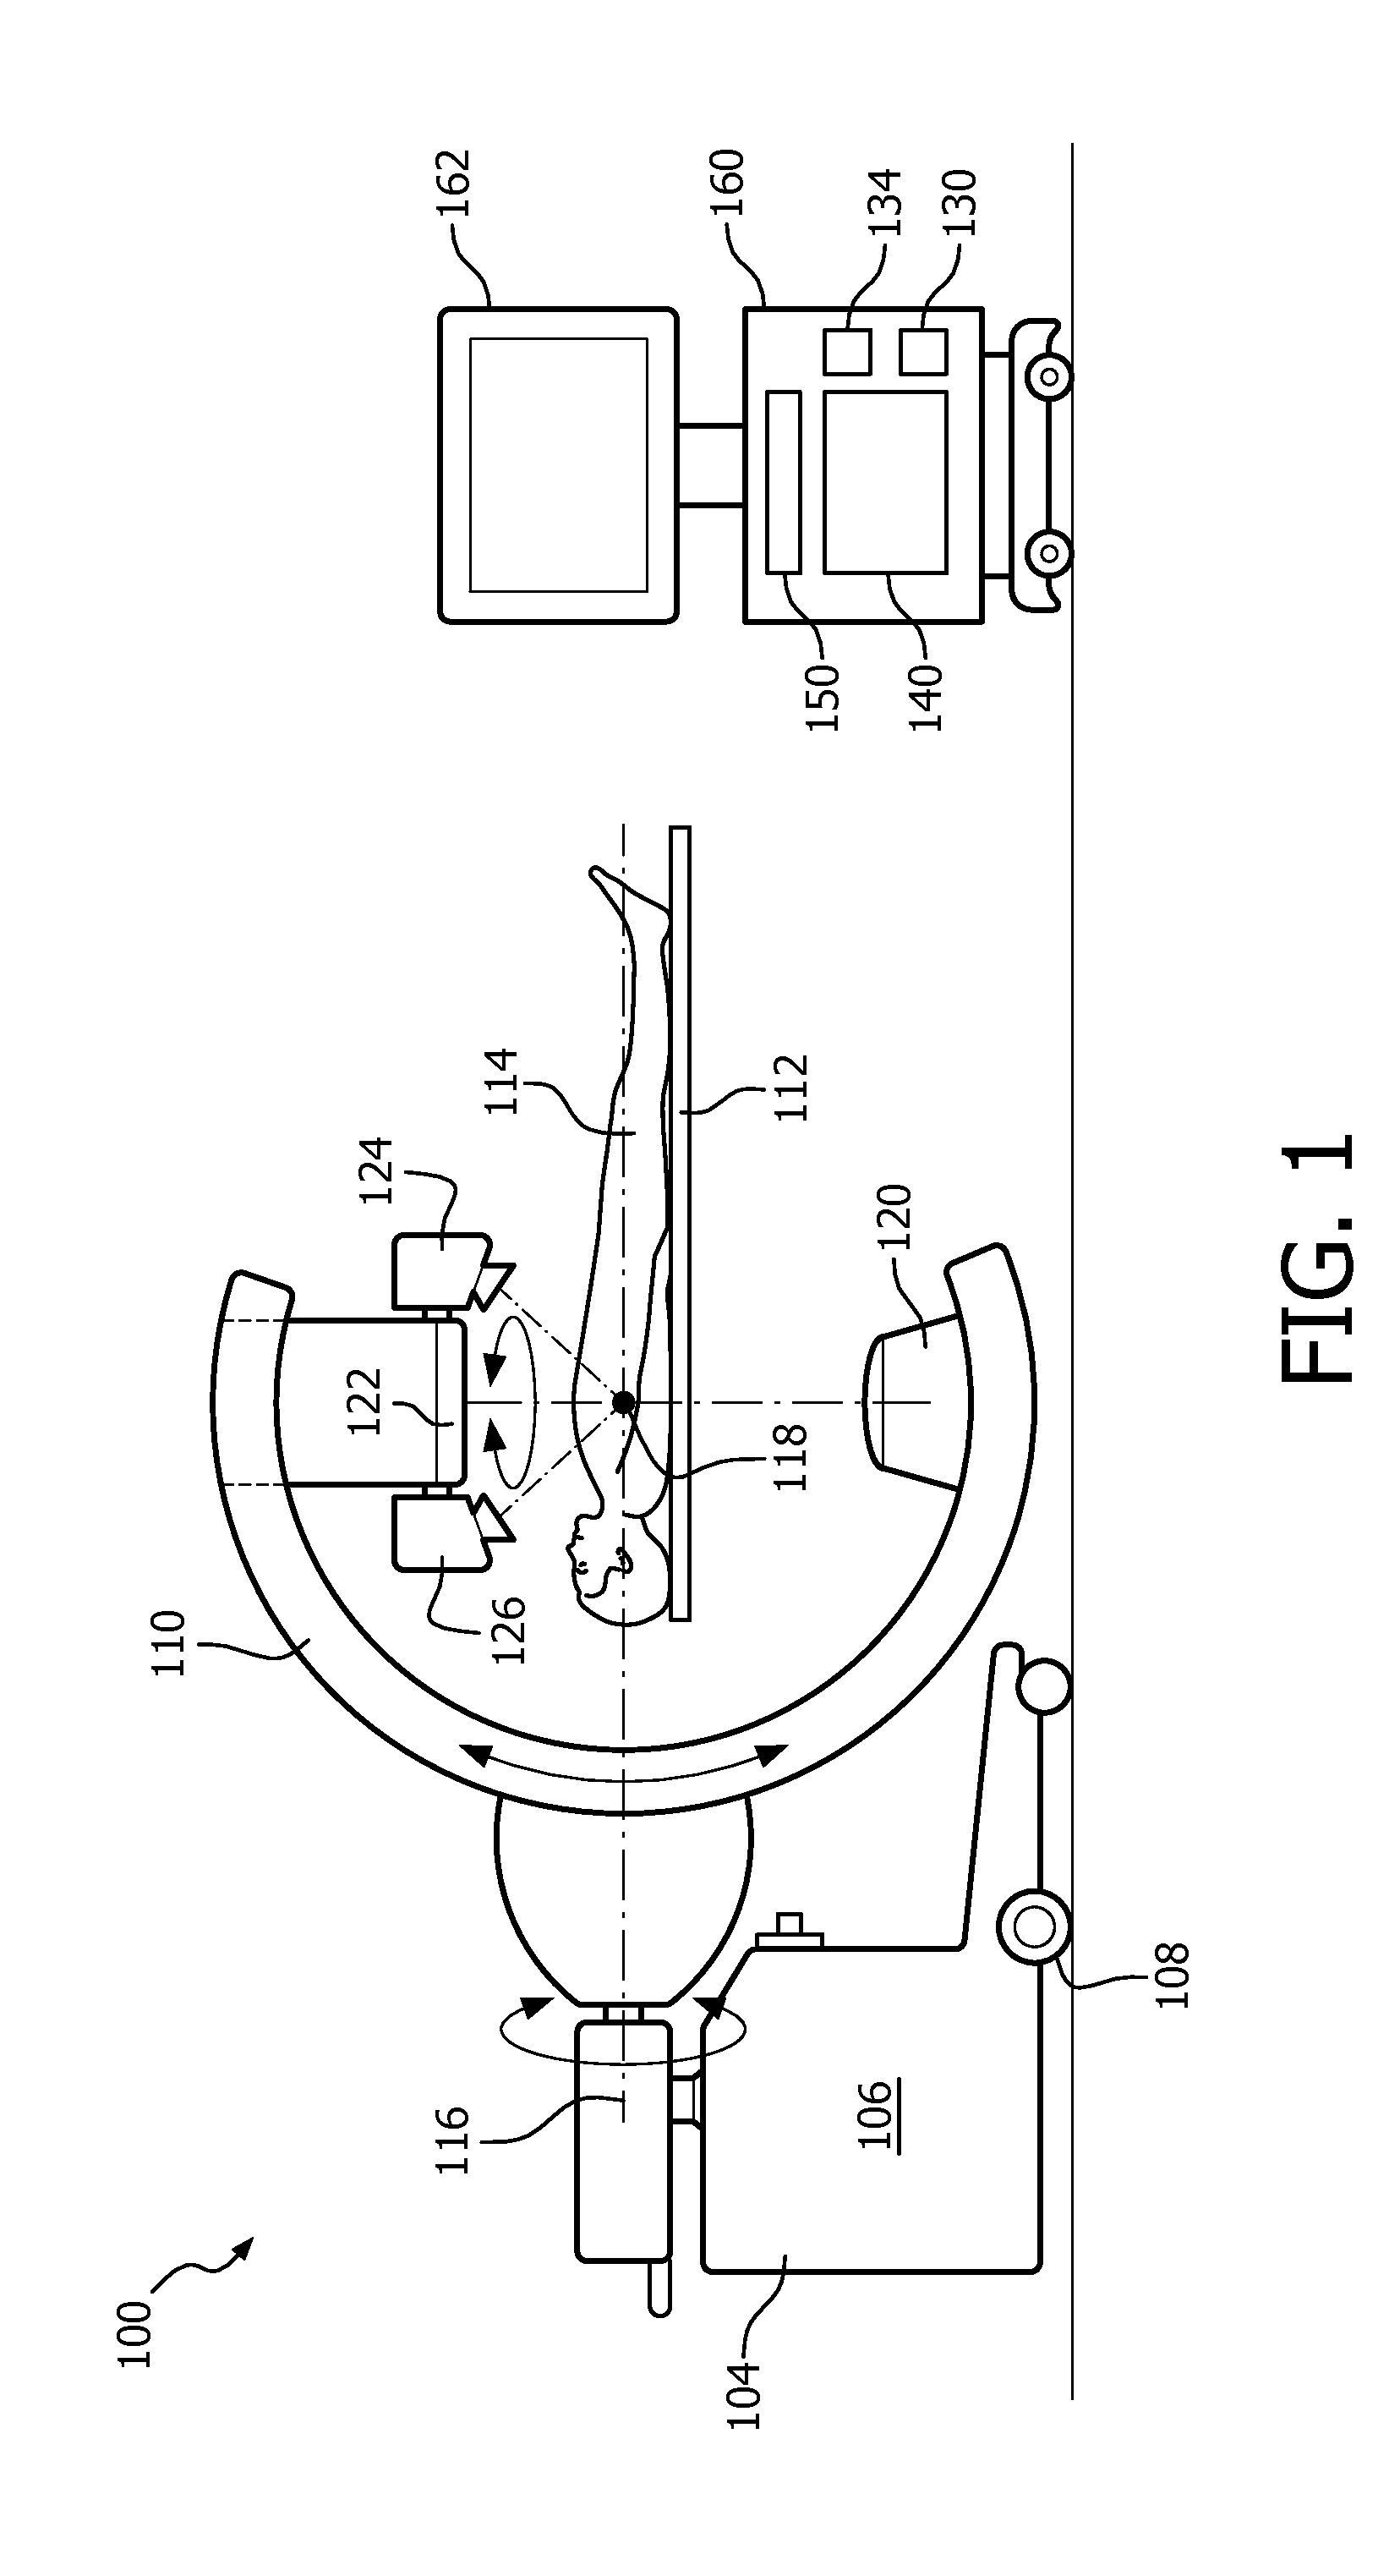 Imaging system and method for enabling instrument guidance